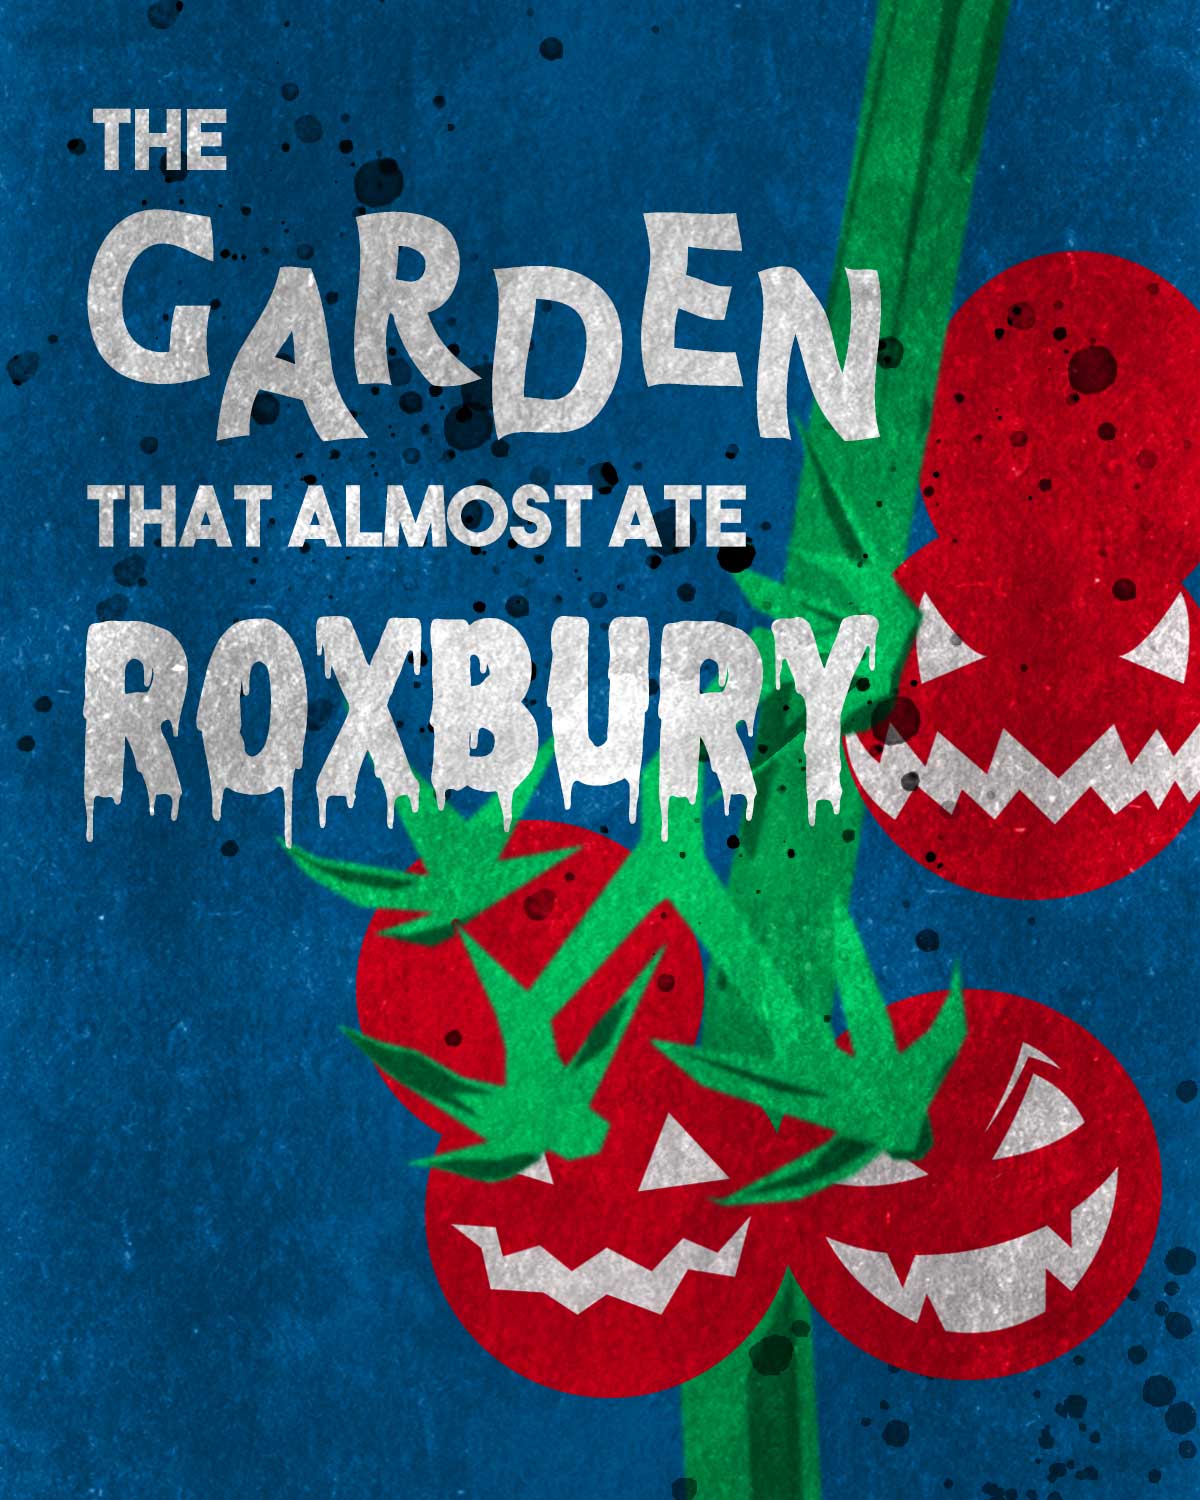 An illustration of killer tomatoes and a title that says 'The Garden that Almost ate Roxbury'.